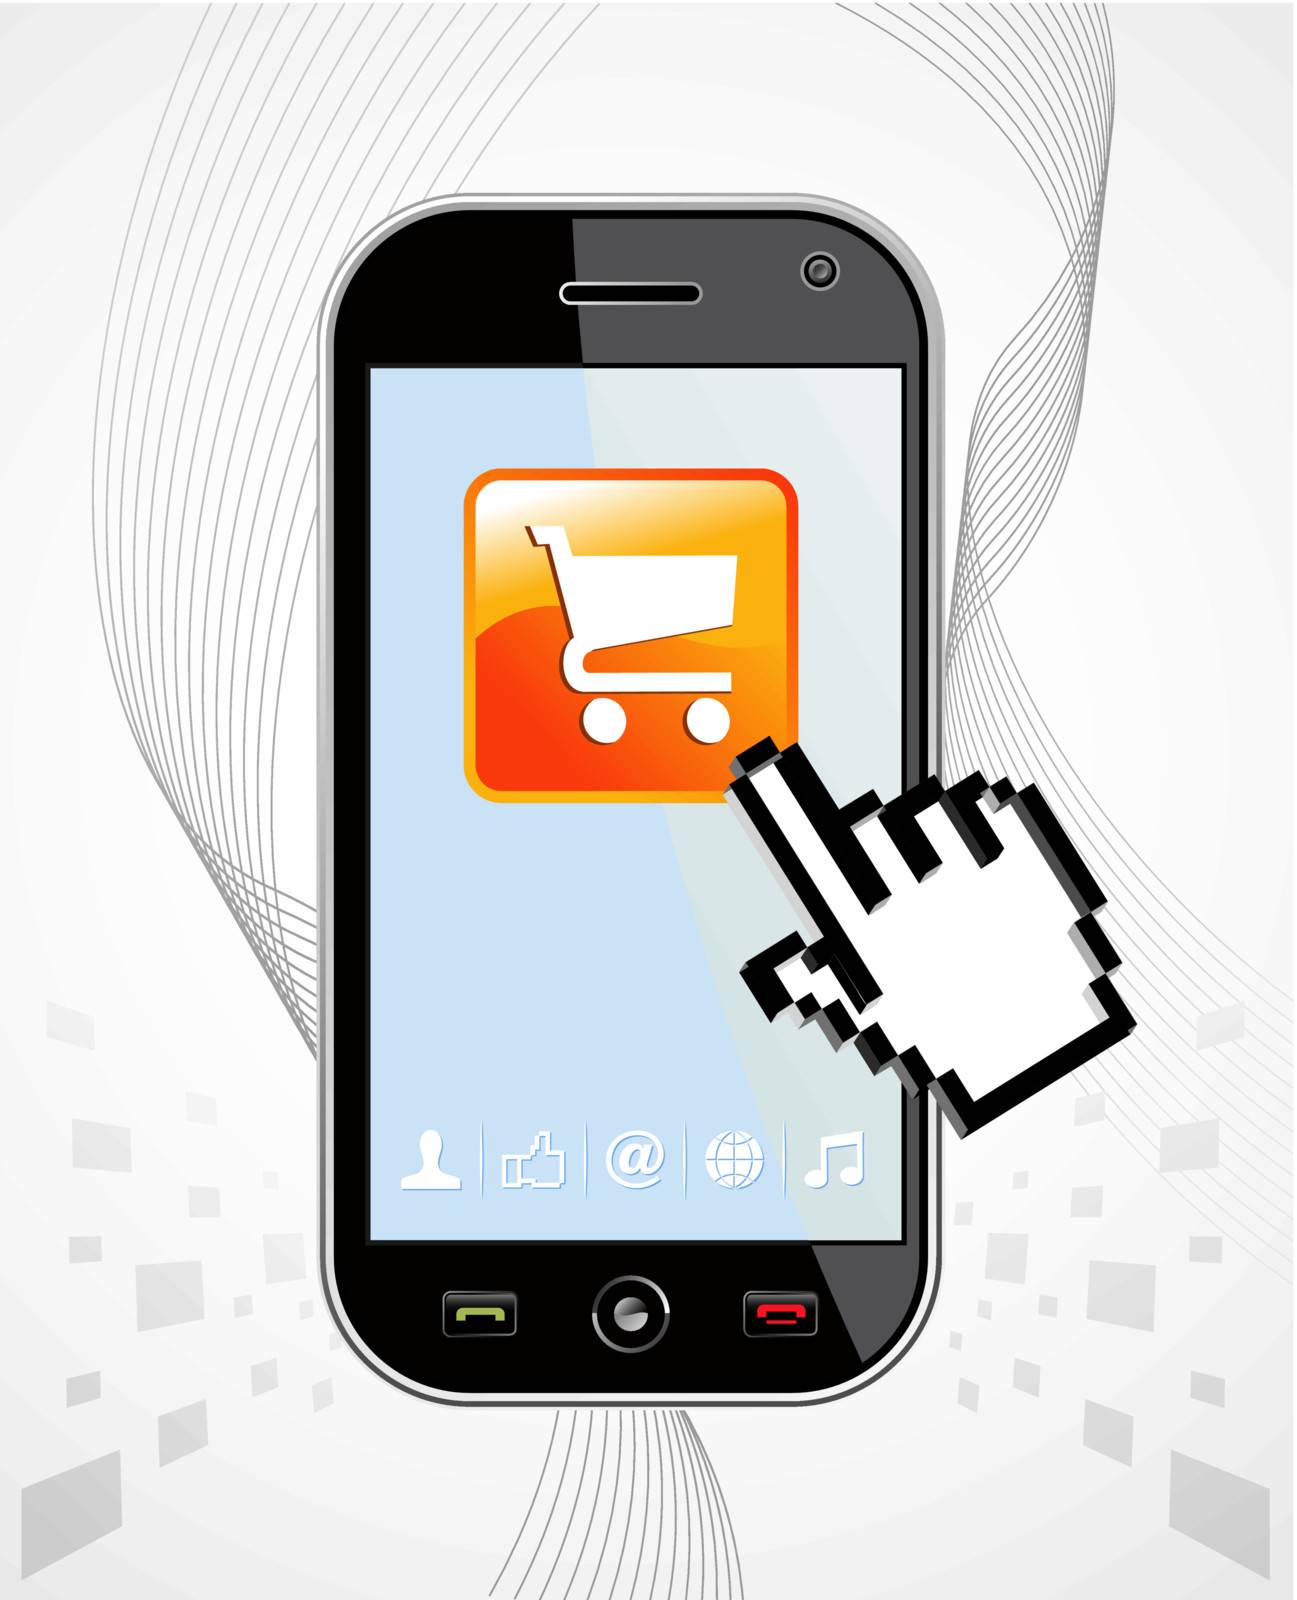 Smartphone buy application by cienpies